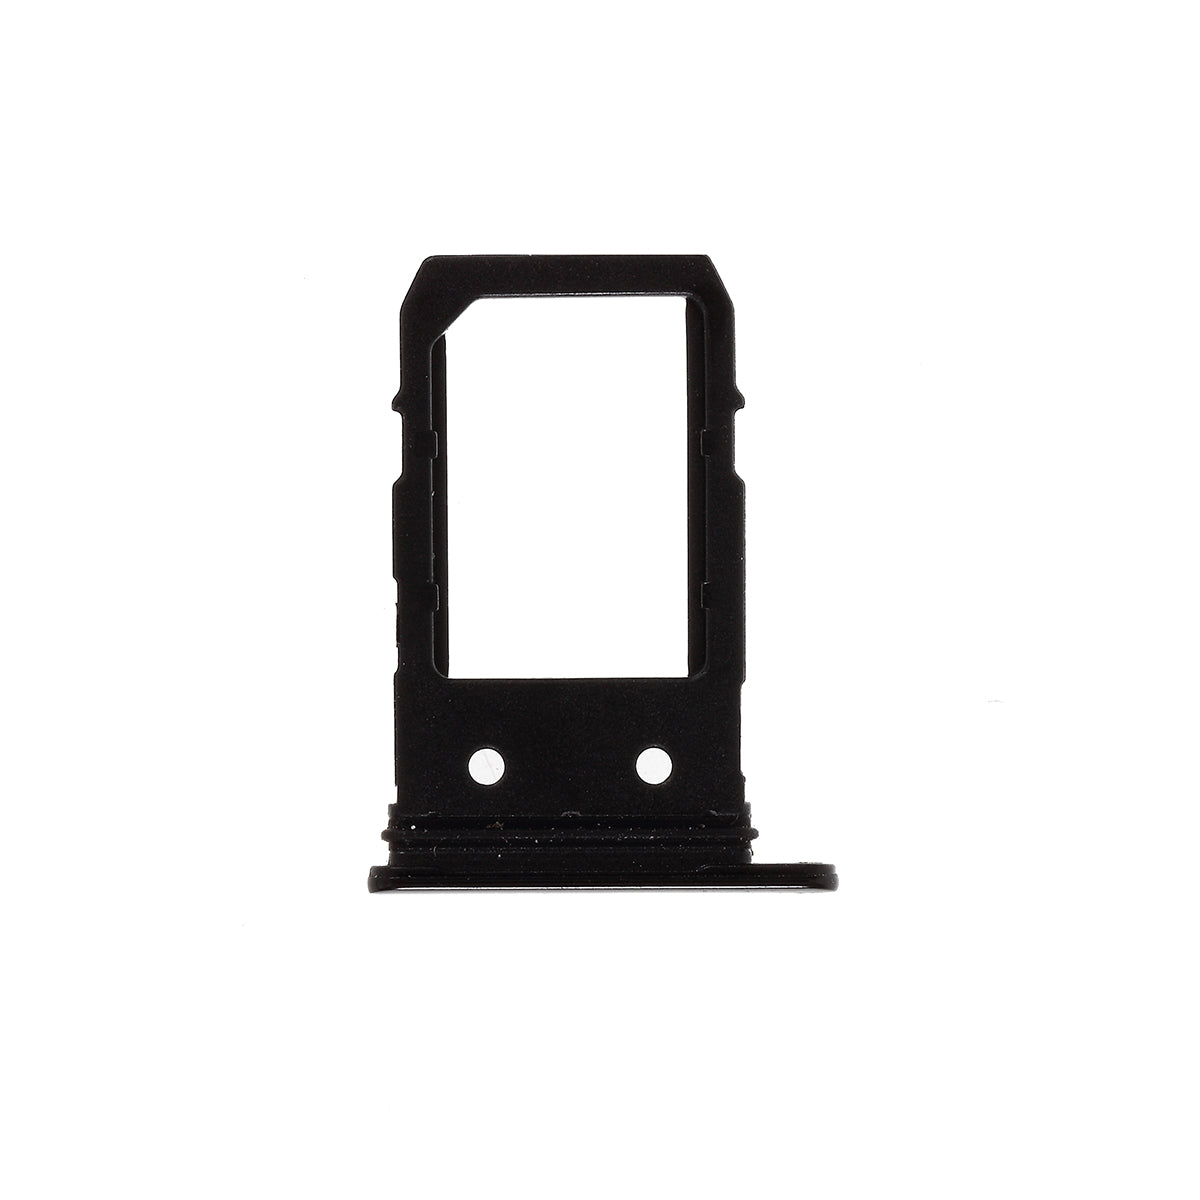 OEM SIM Card Tray Holder Replacement for Google Pixel 3a G020A, G020E, G020B - Black